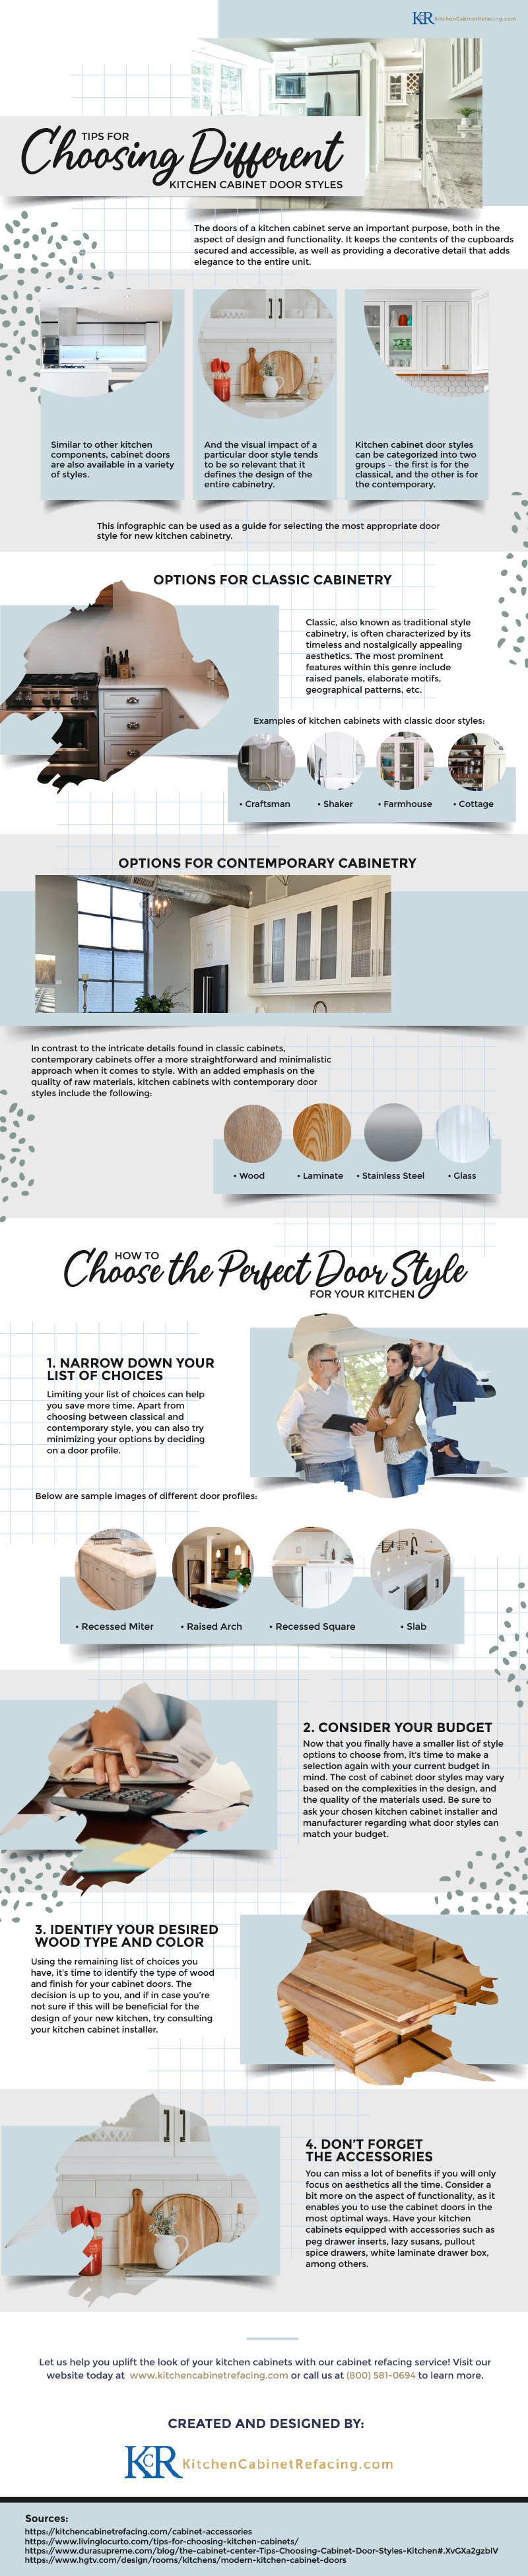 Tips for Choosing Different Kitchen Cabinet Door Styles (Infographic)